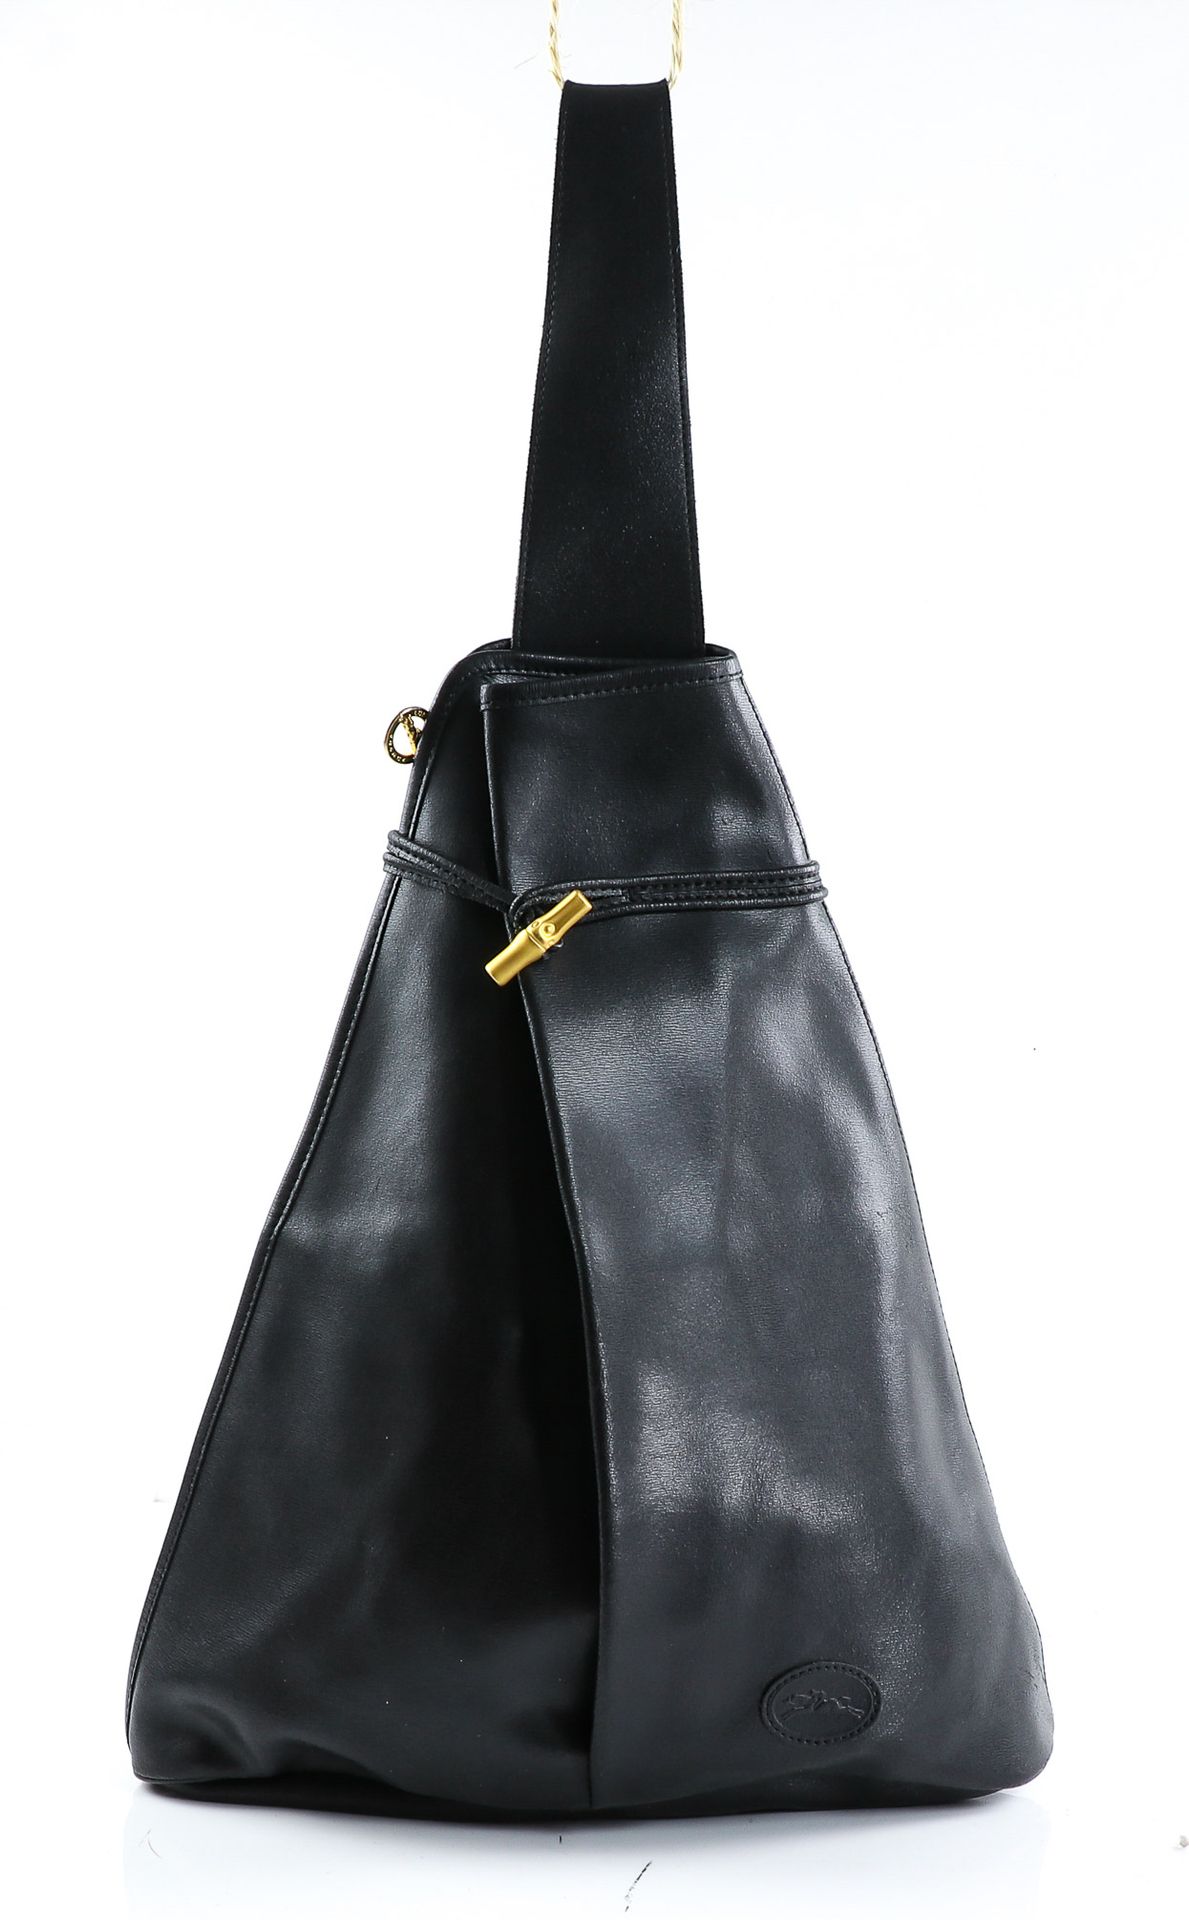 Null LONGCHAMP - "Reed" backpack in black leather - Gold metal trim